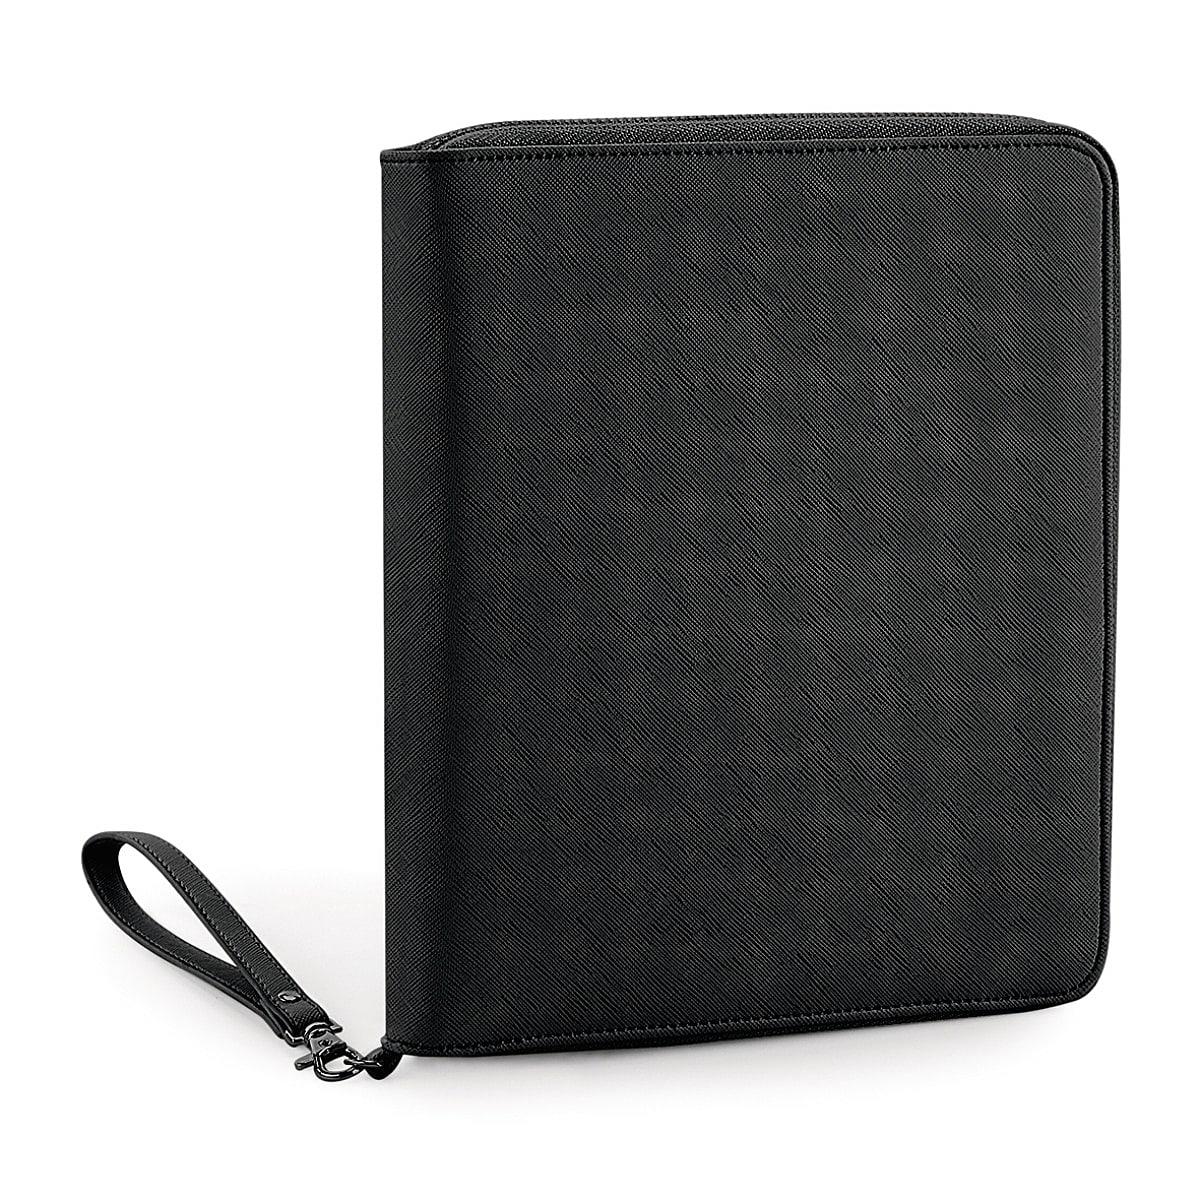 Bagbase Boutique Travel Tech Organiser in Black (Product Code: BG756)